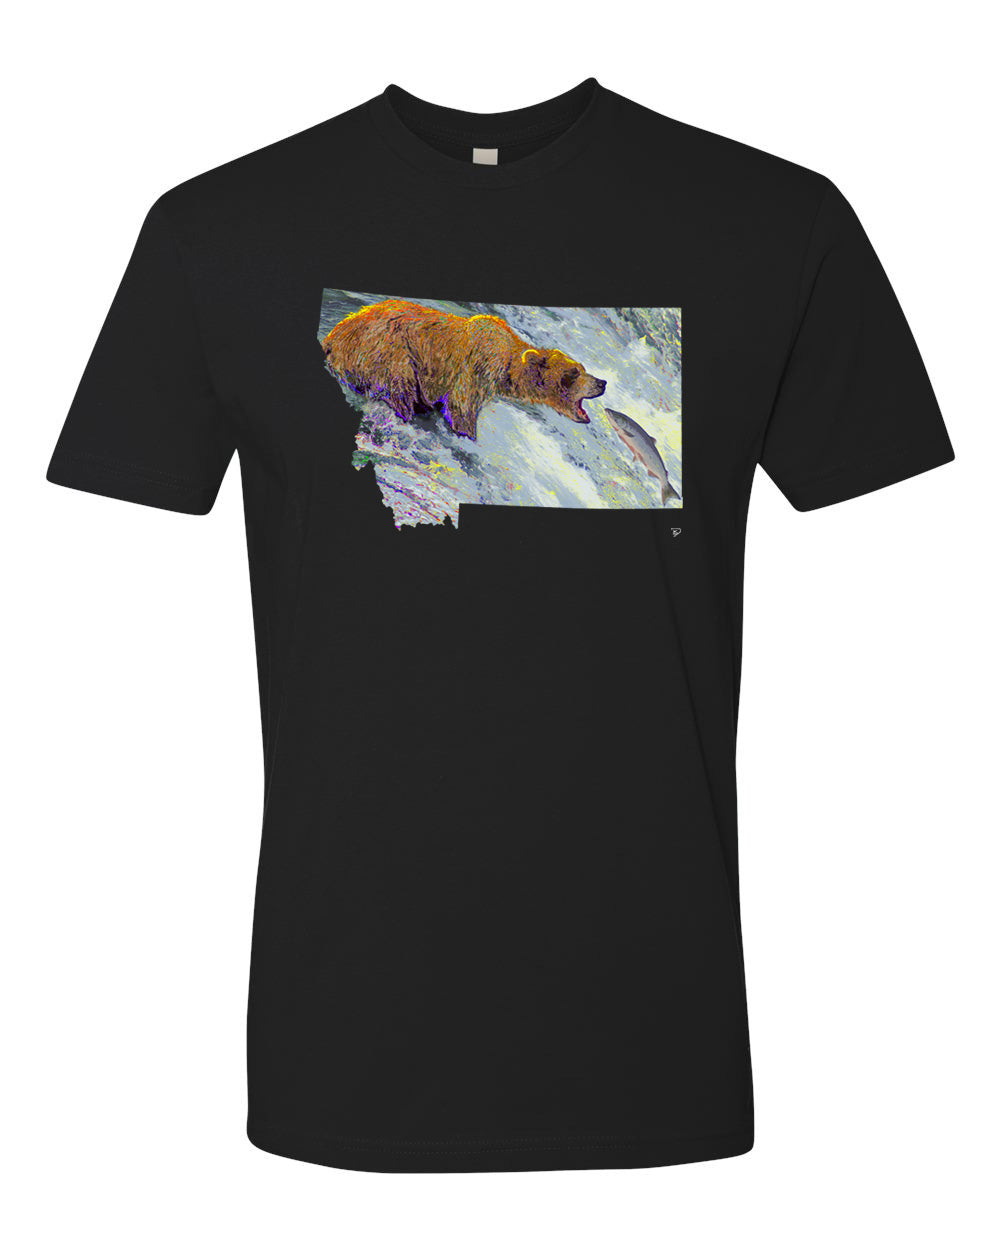 Grizzly Bear Unisex T-Shirt 